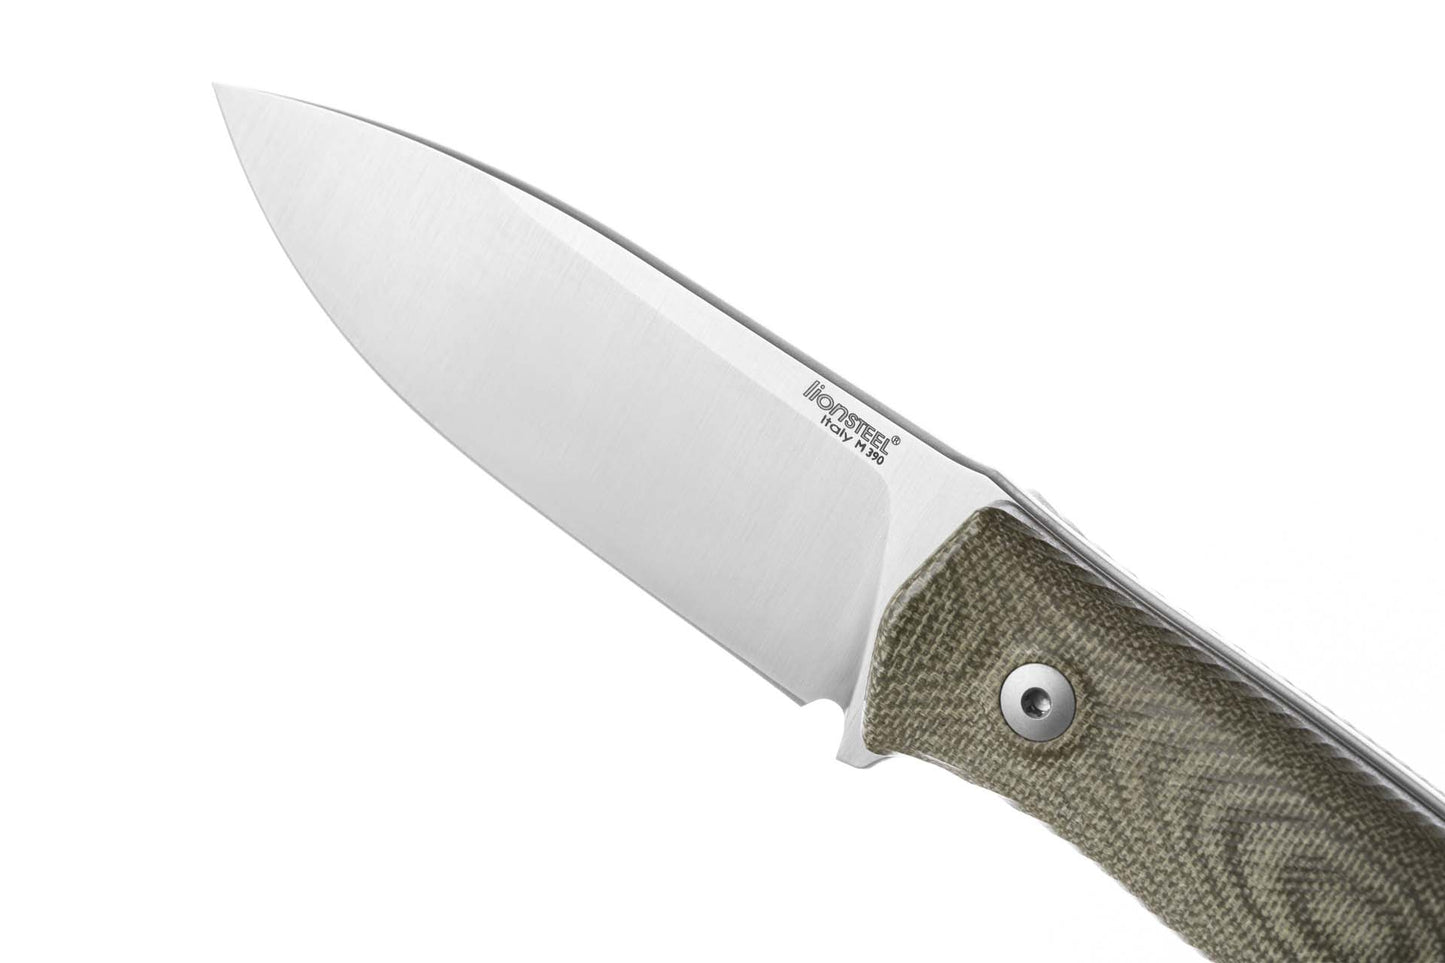 LionSteel M4 3.74" M390 Green Canvas Micarta Fixed Blade Knife with Leather Sheath